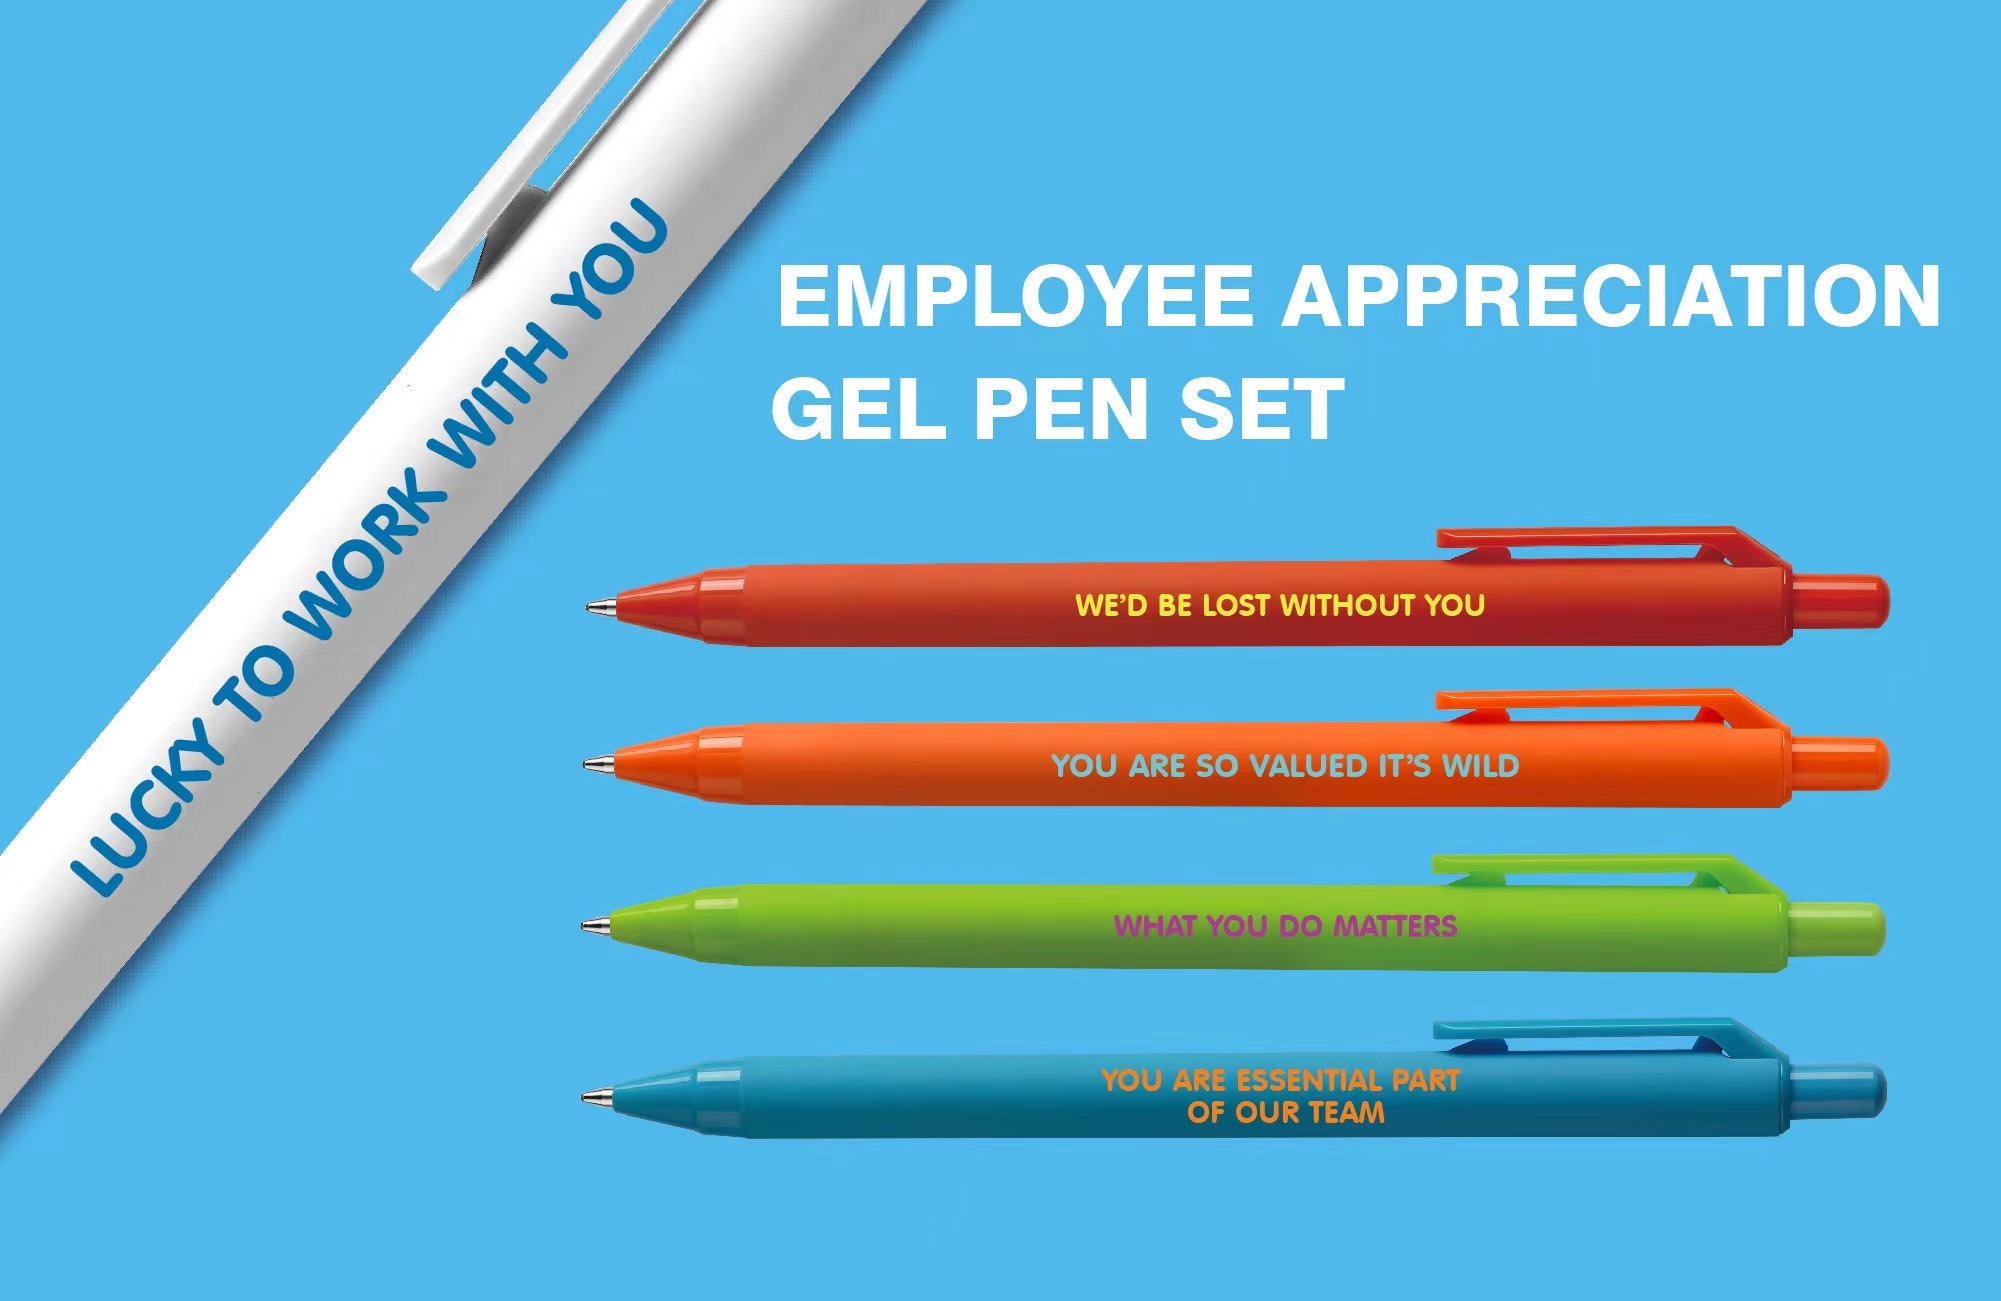 Funny Pens, Thank You Gifts for Coworkers, Pens, Coworker Gift 